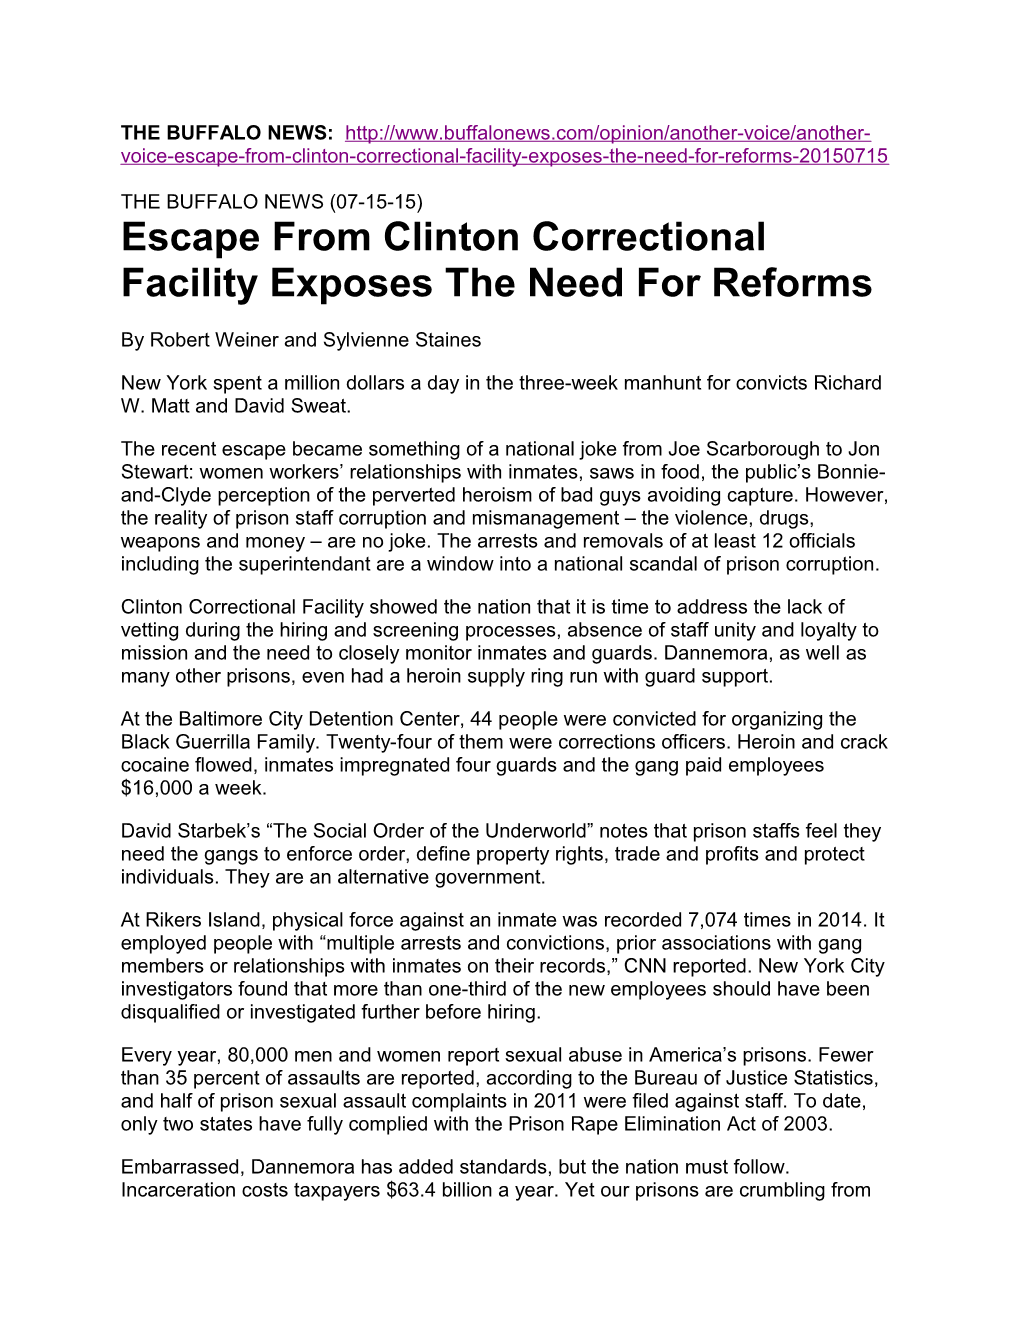 Escape from Clinton Correctional Facility Exposes the Need for Reforms